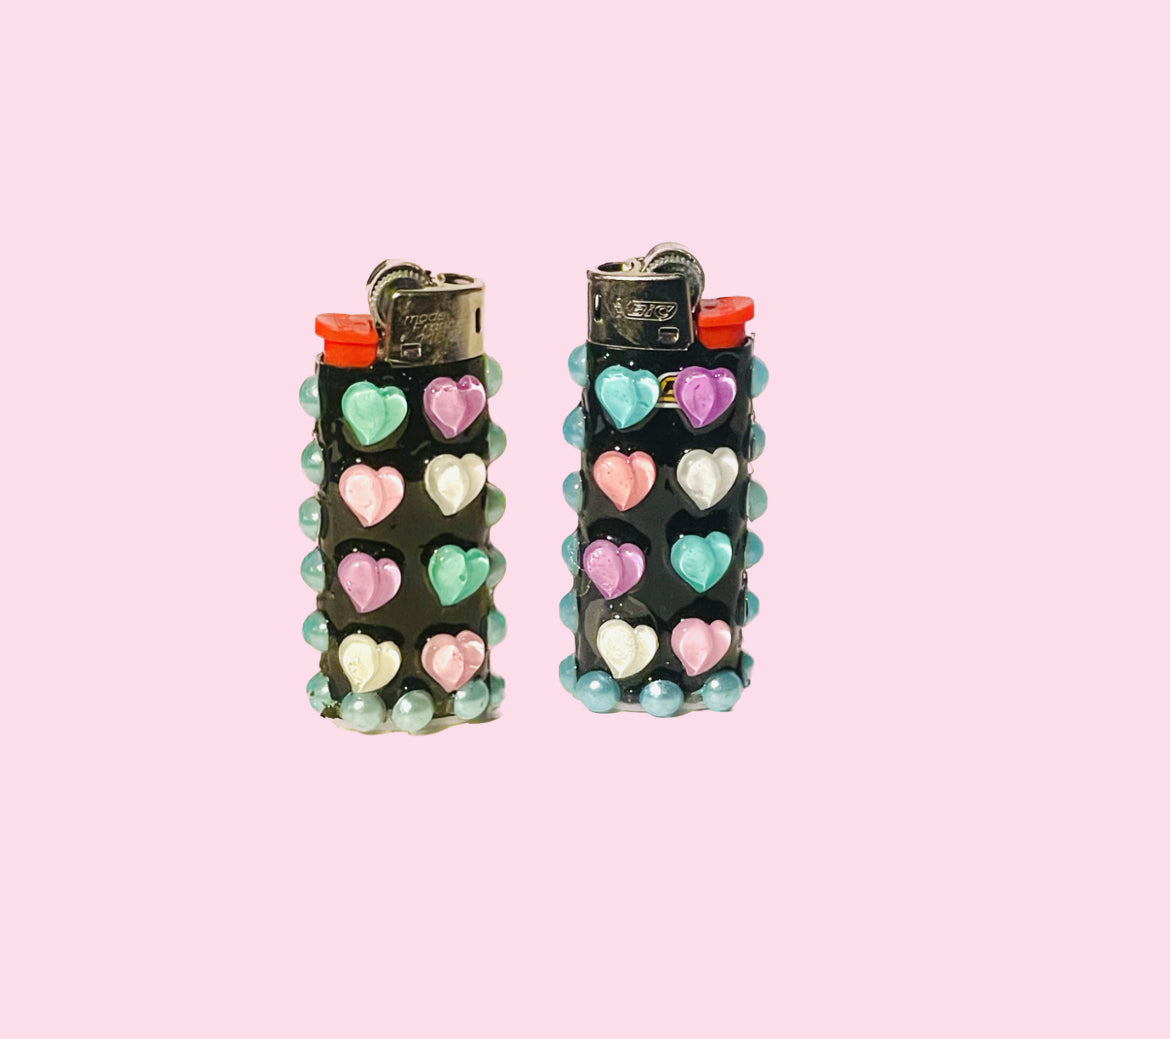 Candy Clouds Hand-Decorated Mini lighter -Black with Pastel pink and Blue hearts and Pearls